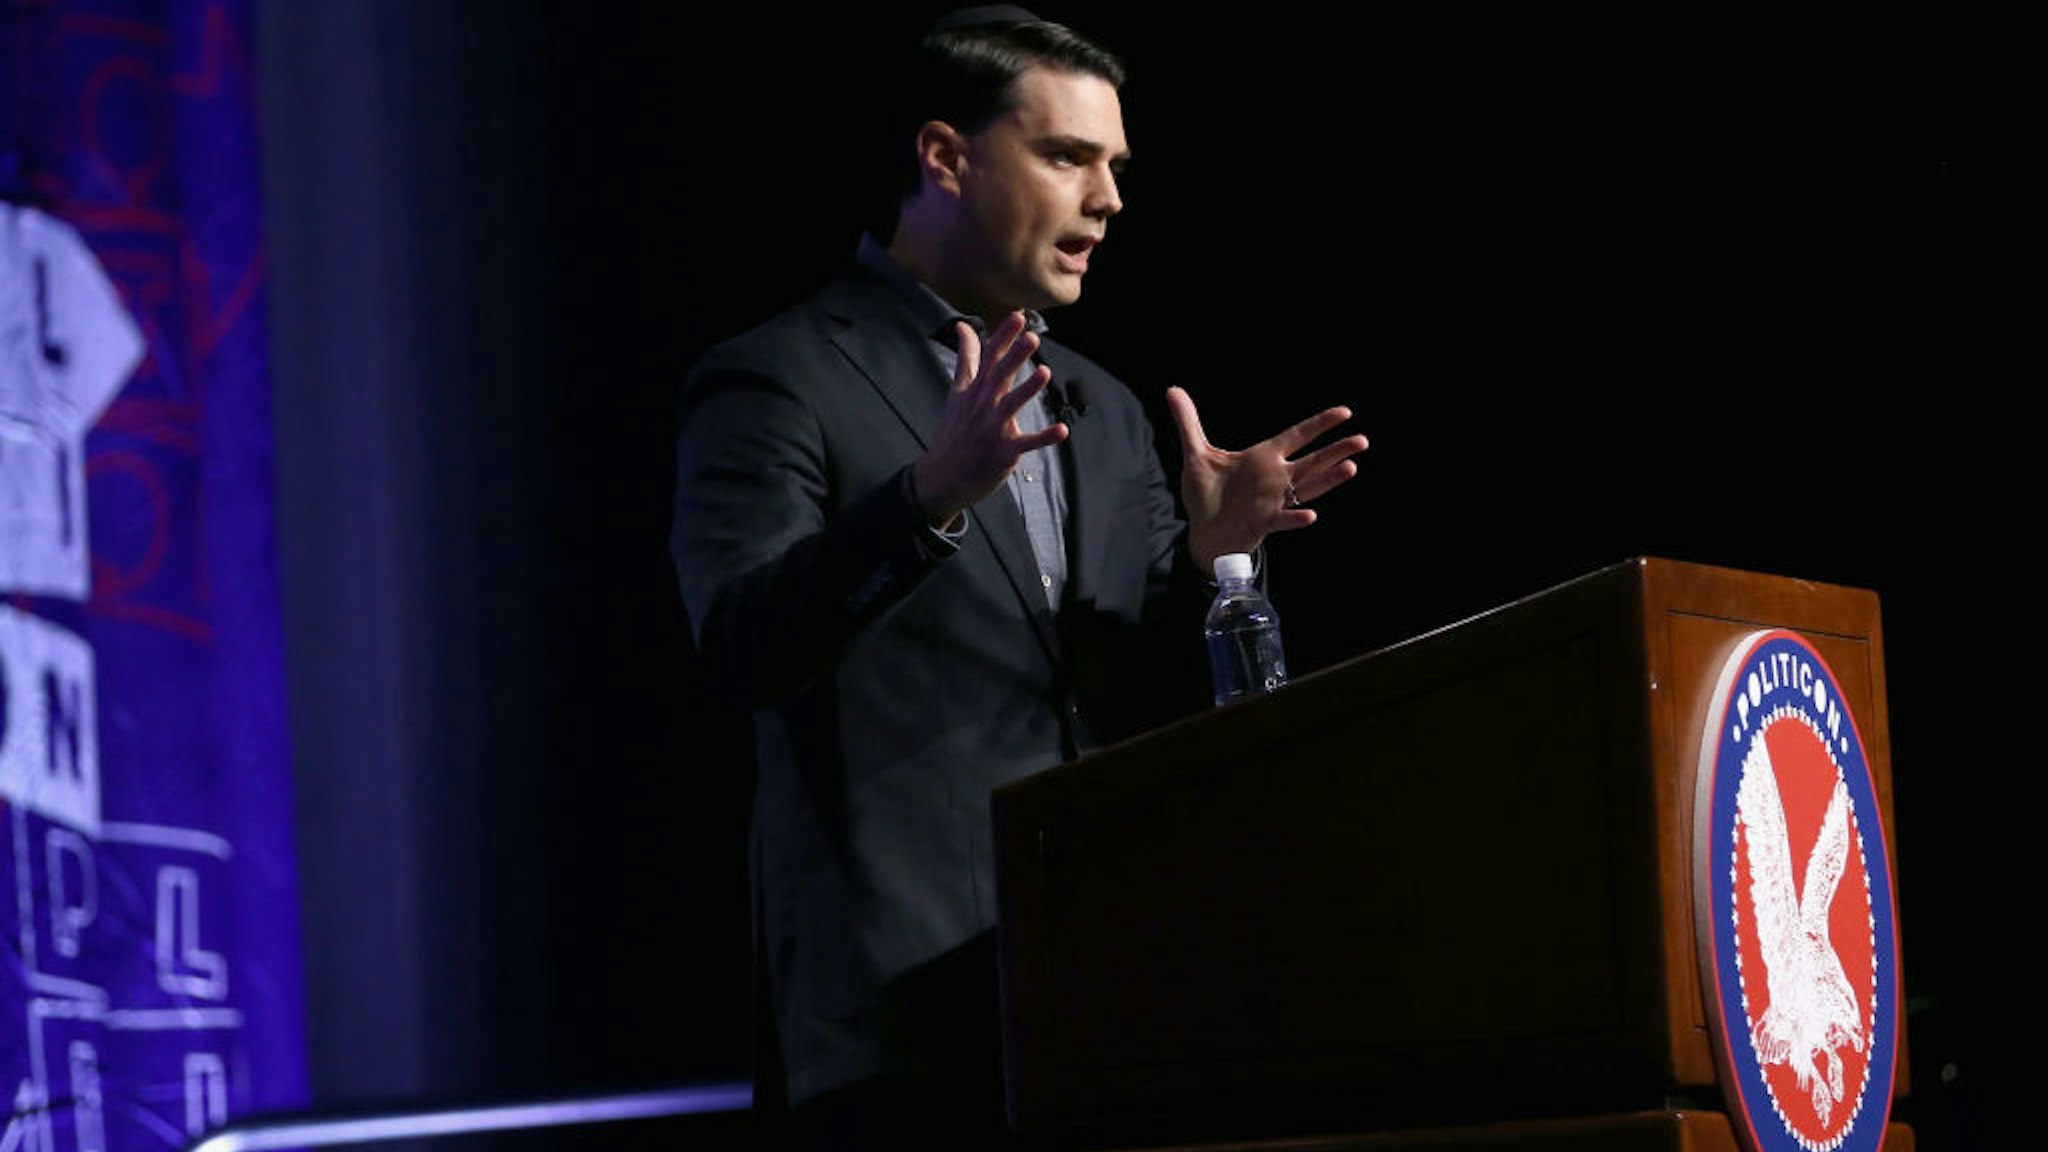 Ben Shapiro speaks onstage during Politicon 2018 at Los Angeles Convention Center on October 21, 2018 in Los Angeles, California. (Photo by Rich Polk/Getty Images for Politicon )